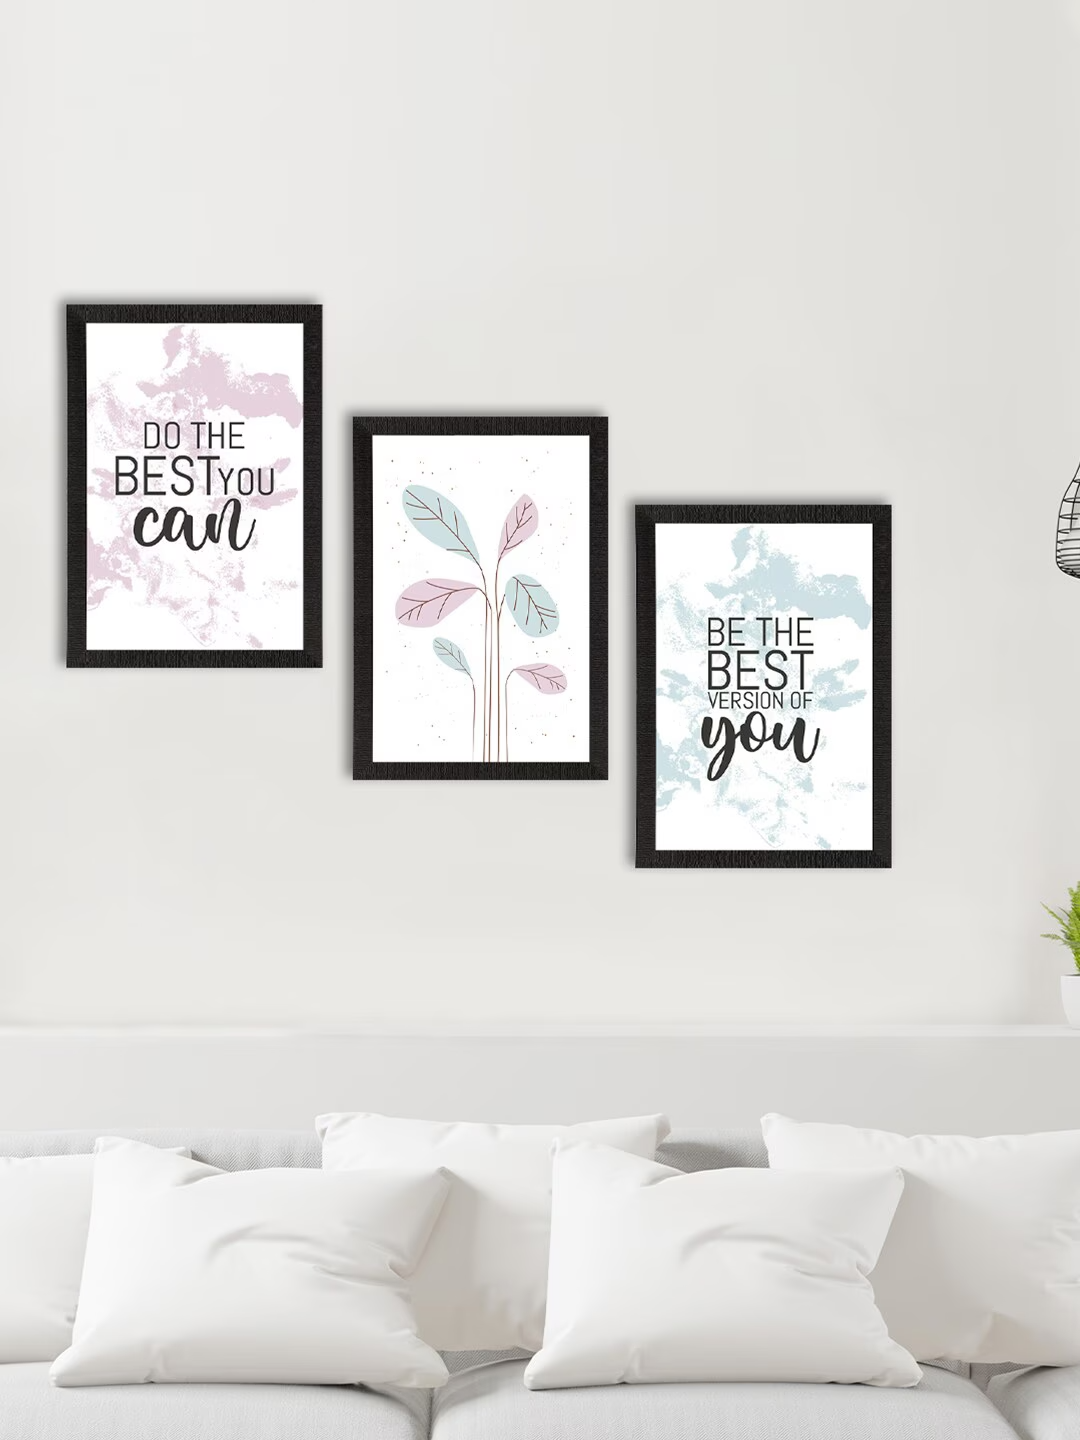 Set of 3 White & Black Motivational Quotes Printed Framed Wall Art